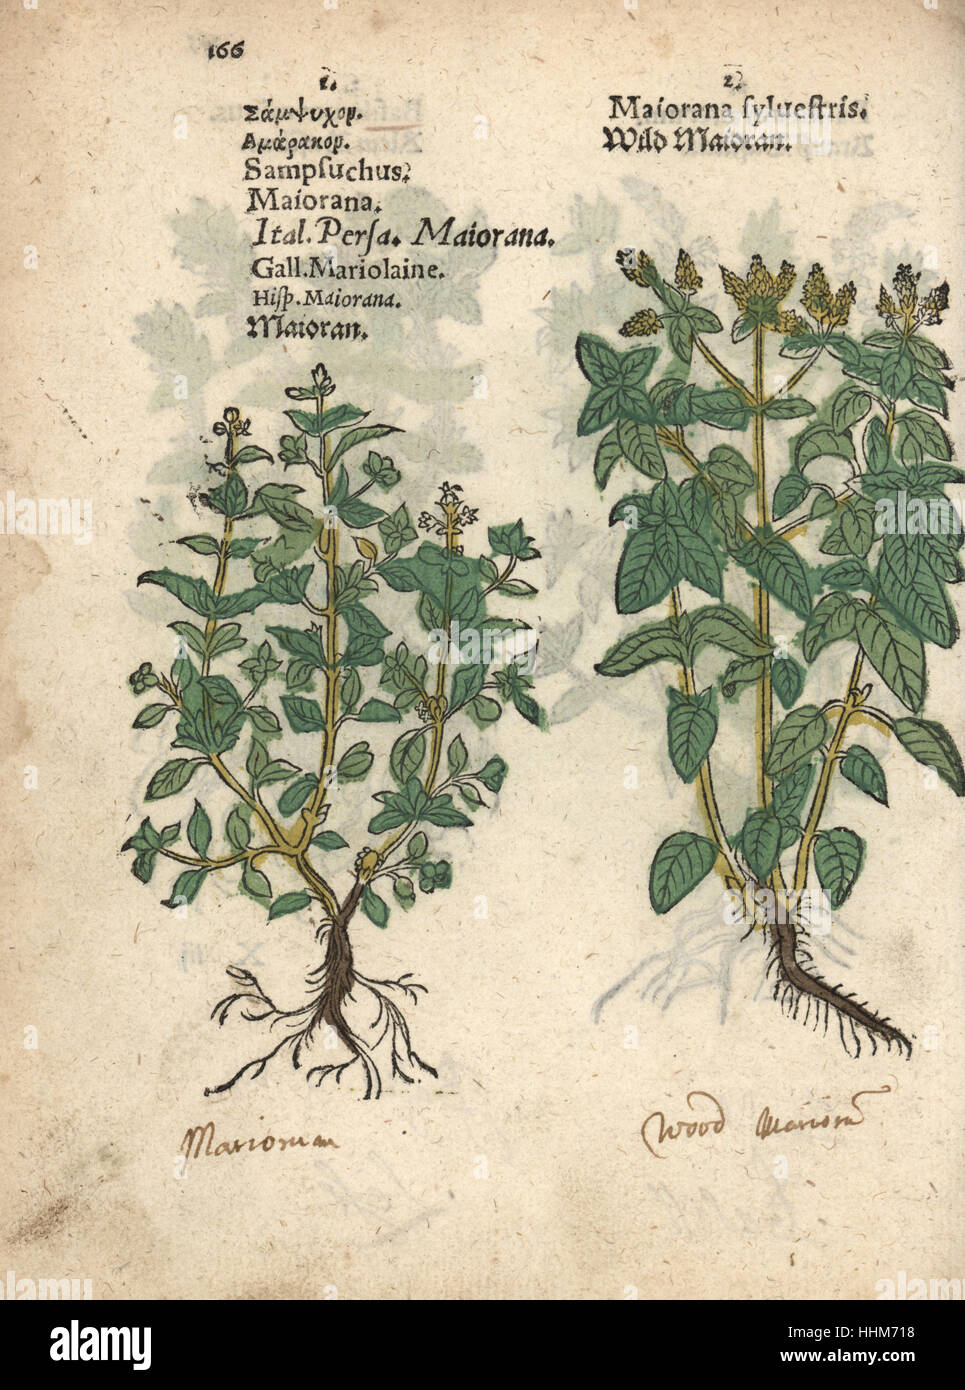 Marjoram, Origanum majorana, and wild marjoram or oregano, Origanum vulgare. Handcoloured woodblock engraving of a botanical illustration from Adam Lonicer's Krauterbuch, or Herbal, Frankfurt, 1557. This from a 17th century pirate edition or atlas of illustrations only, with captions in Latin, Greek, French, Italian, German, and in English manuscript. Stock Photo